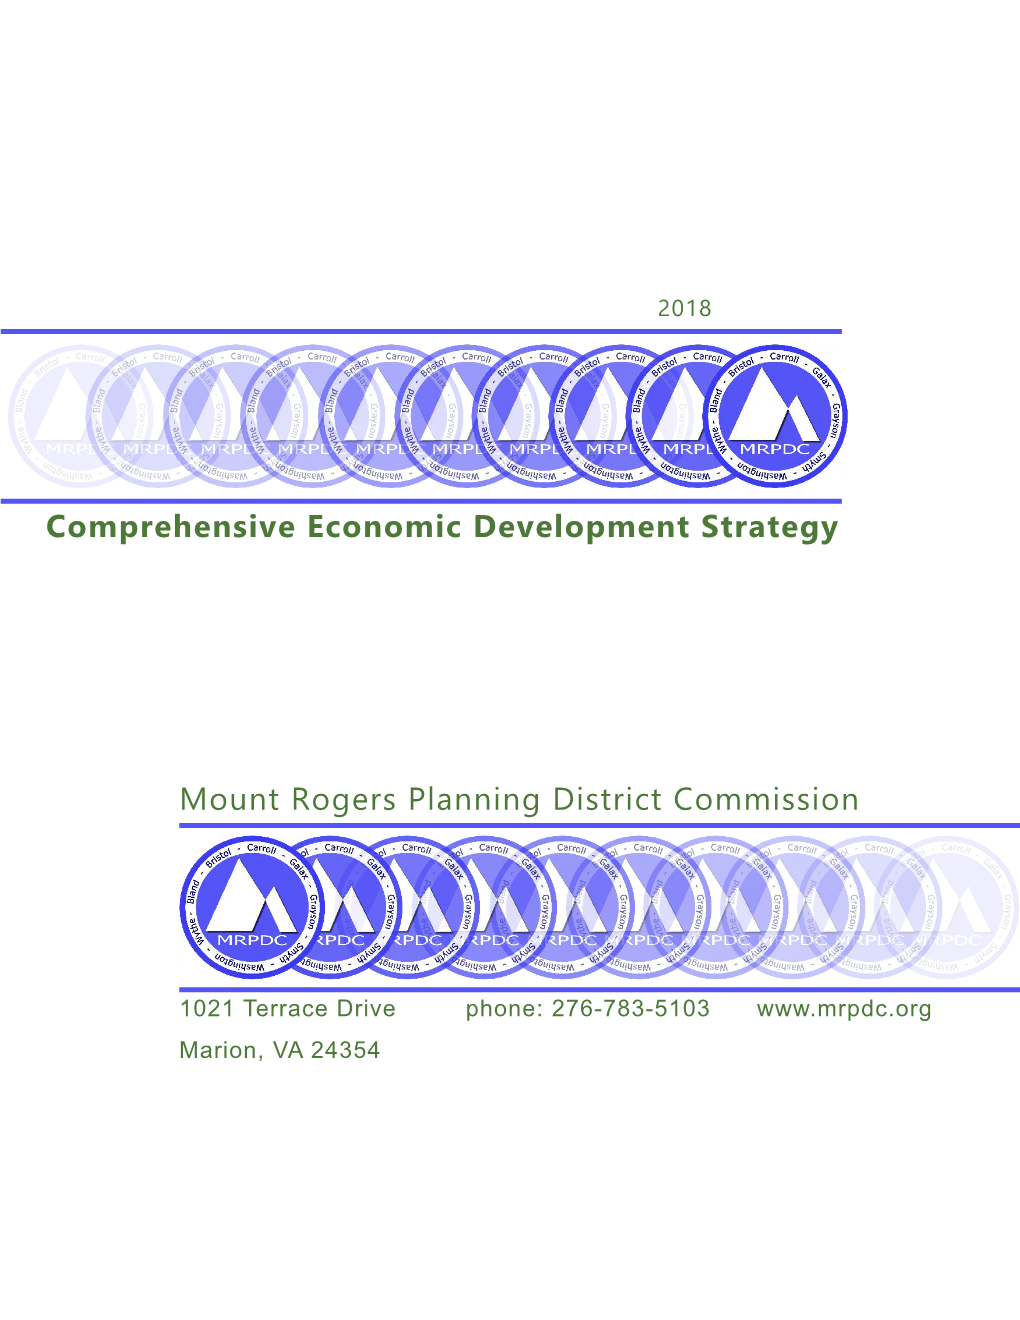 The Mount Rogers Planning District Commission 2018-2023 CEDS